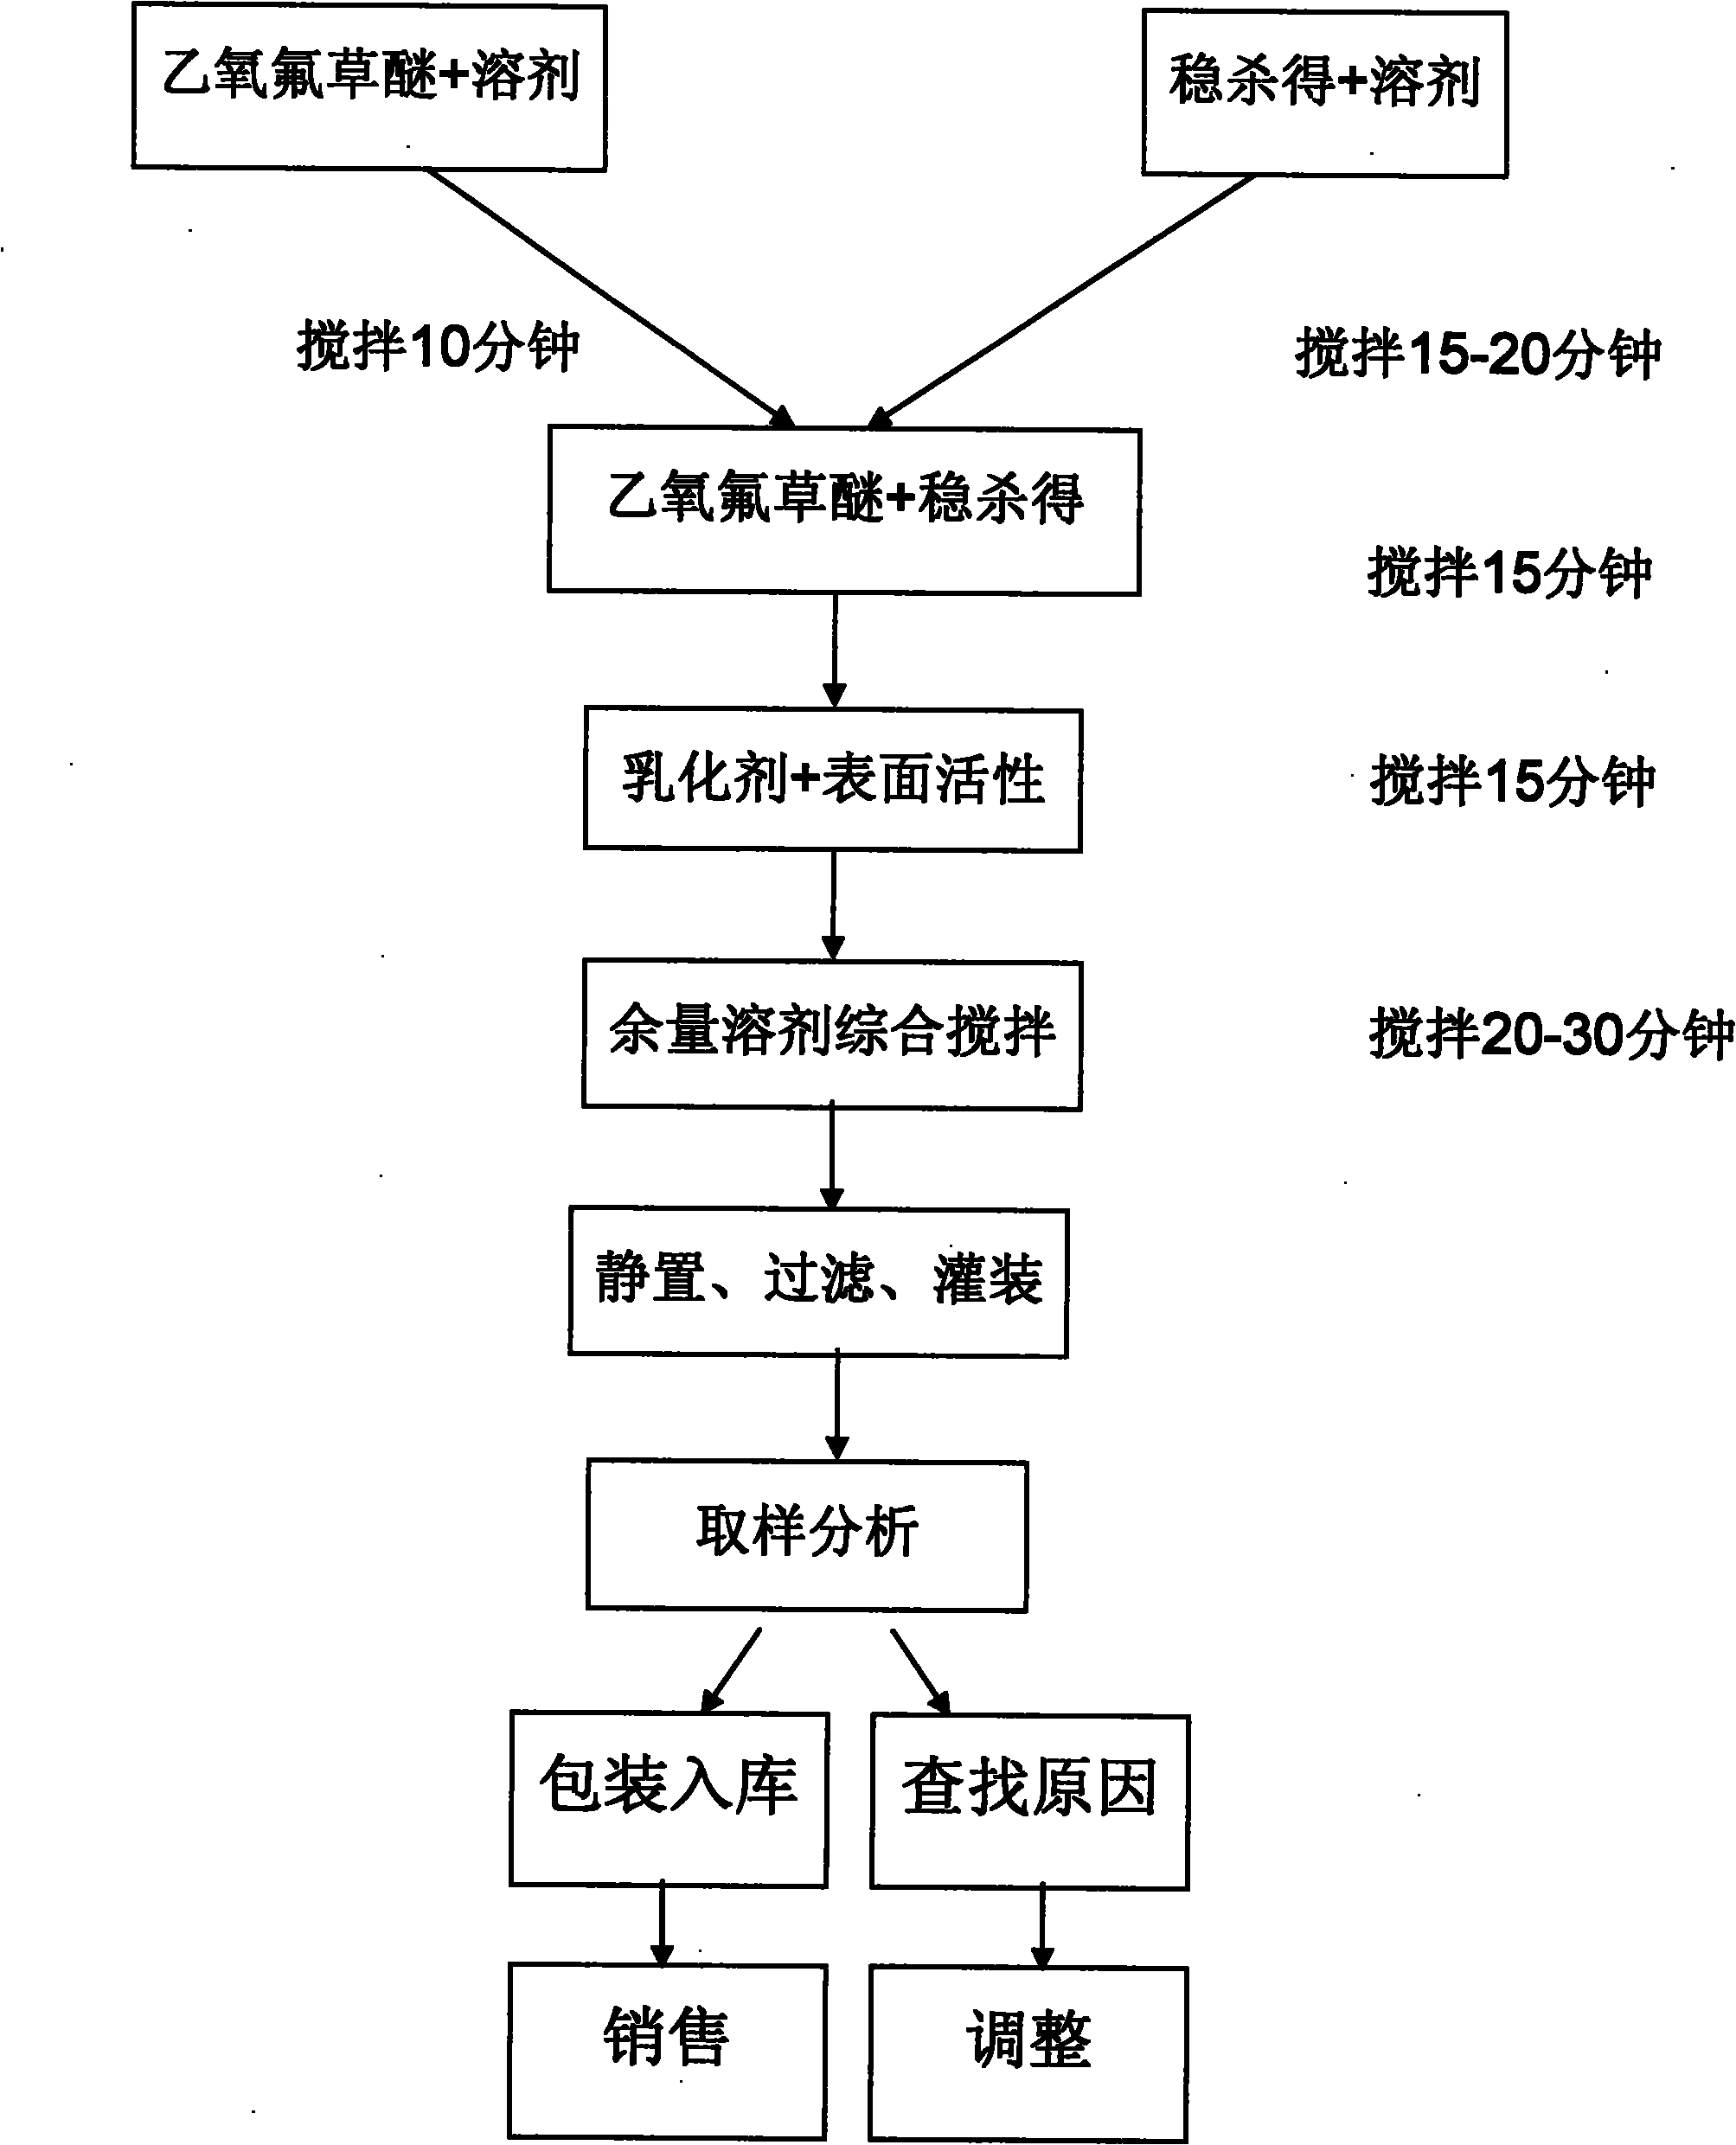 Binary herbicide prepared by compounding oxyfluorfen with fluazifop-butyl and preparation method thereof